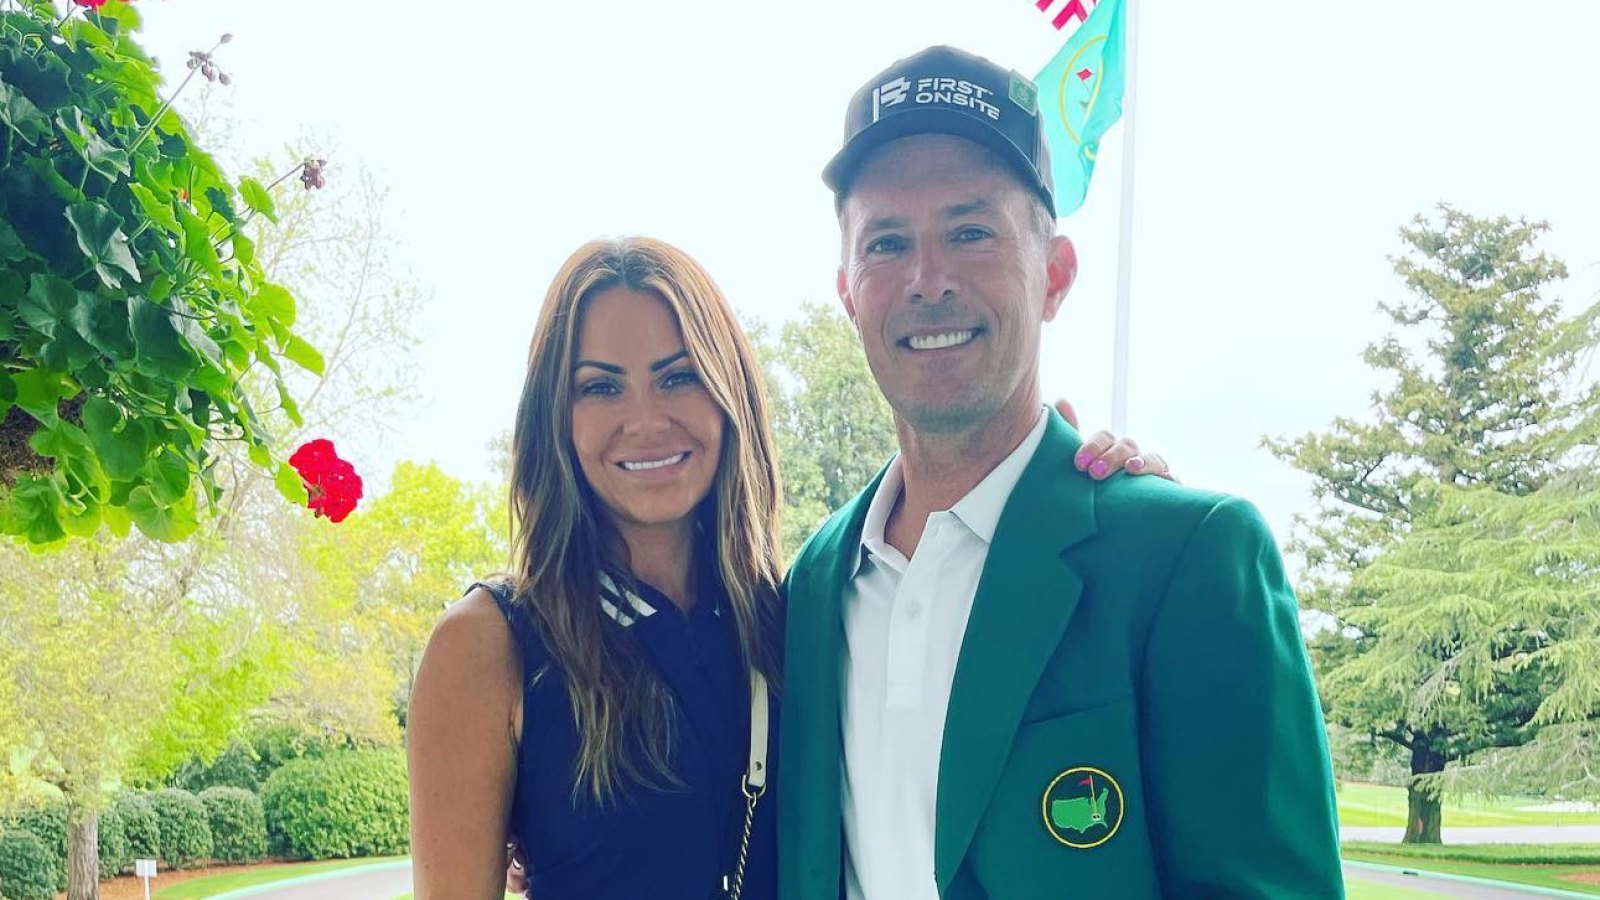 Bachelor s Michelle Money Marries Golfer Mike Weir After 7 Years of Dating